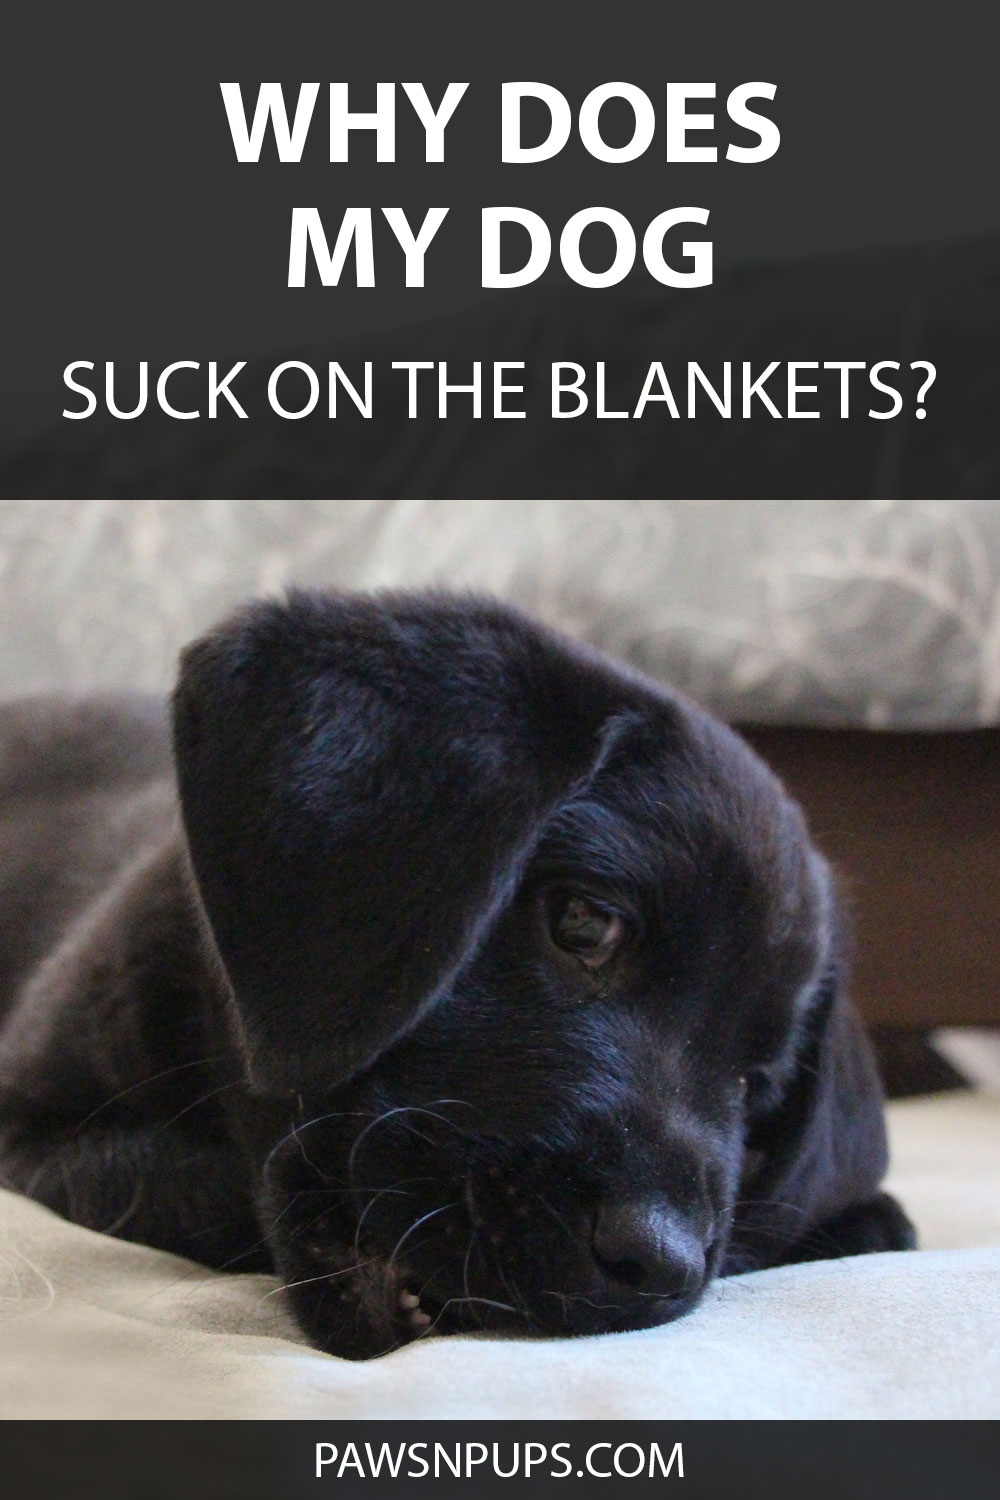 Why Does My Dog Suck On His Blankets? - Black Labrador puppy sucking on his blanket.